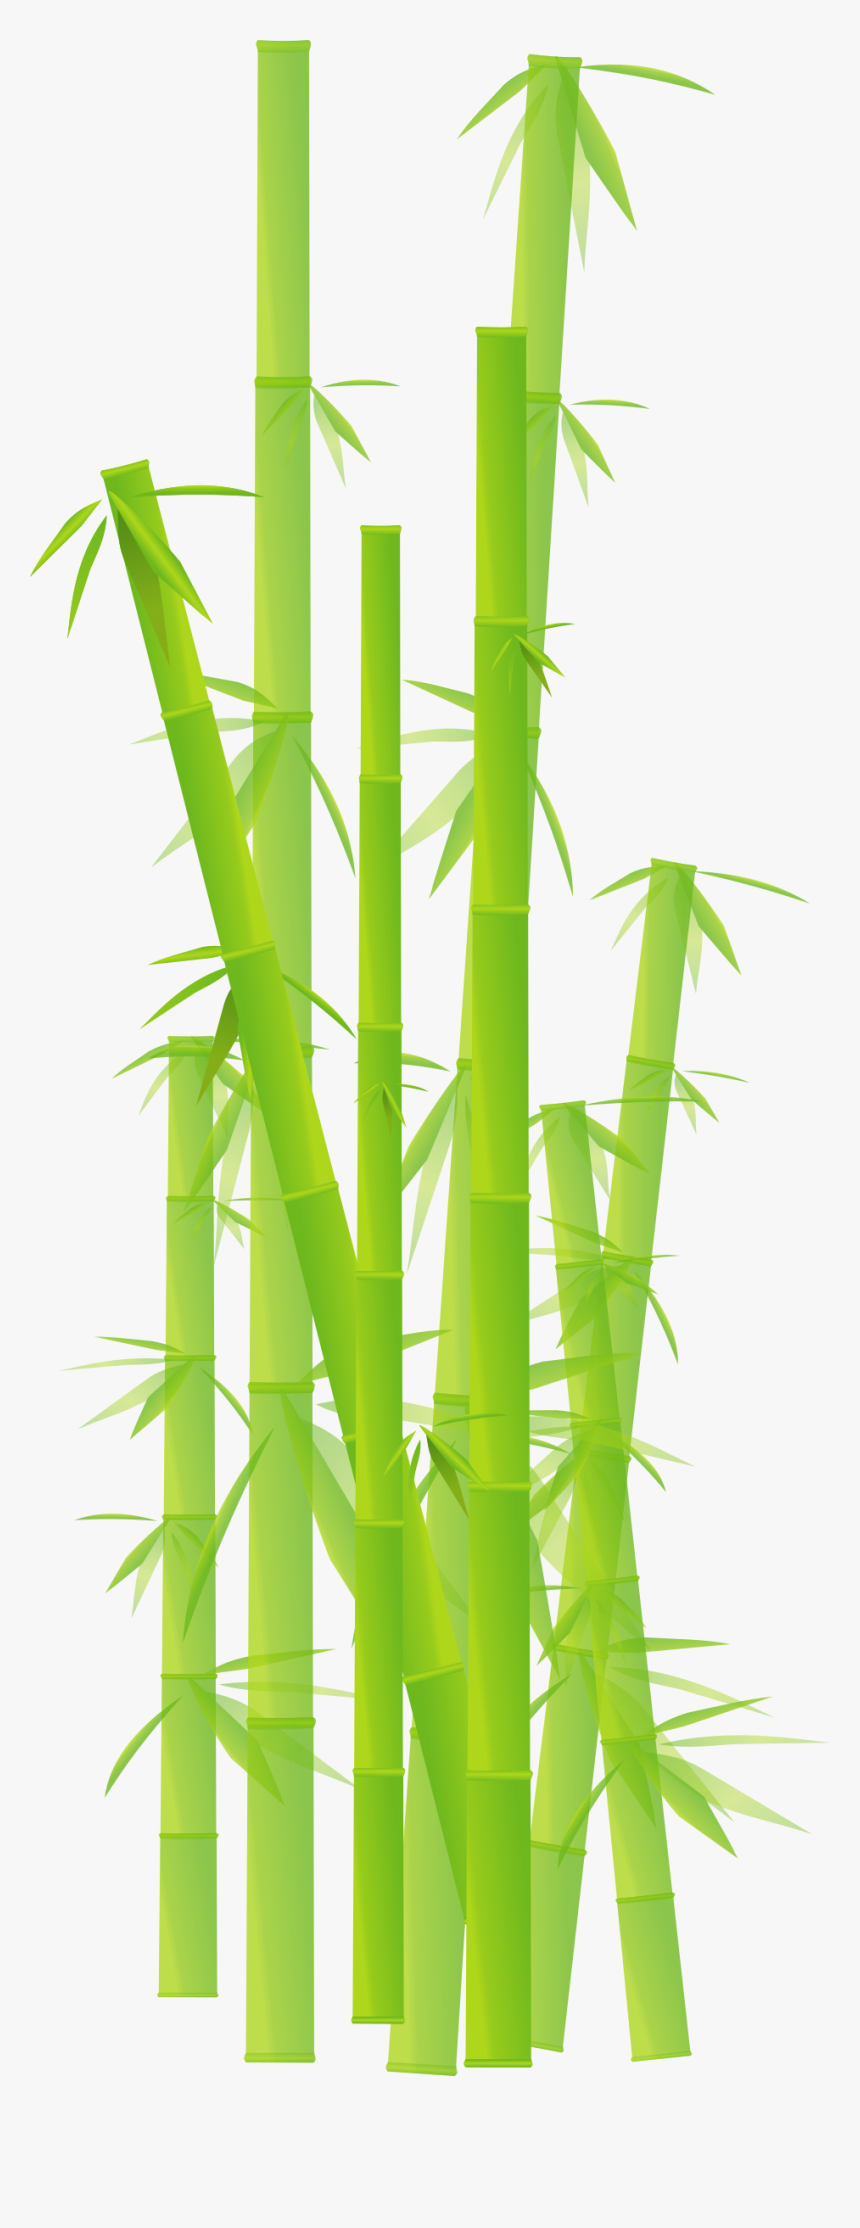 Japan Clipart Bamboo - Transpare